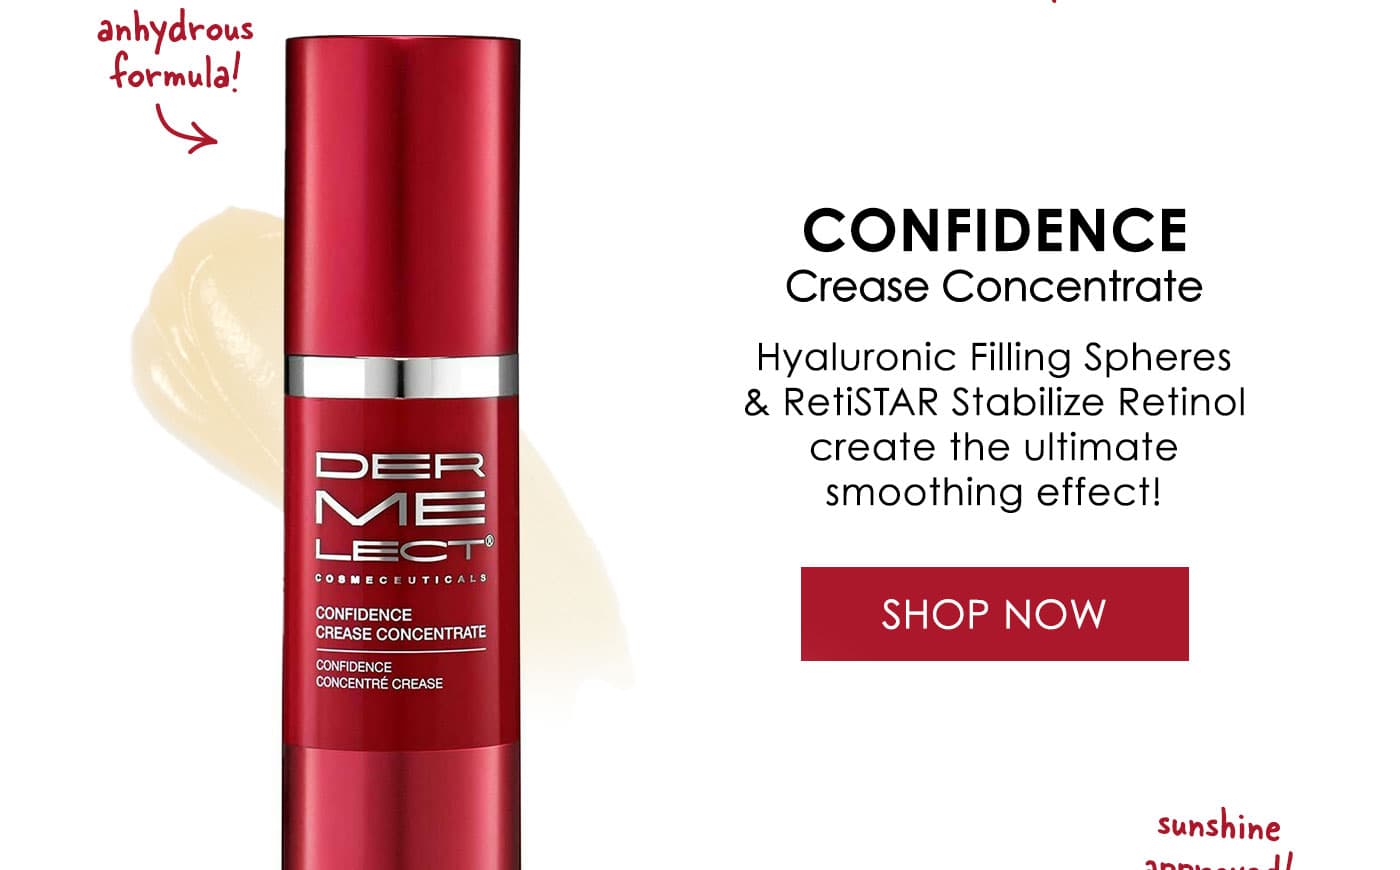 CONFIDENCE Crease Concentrate